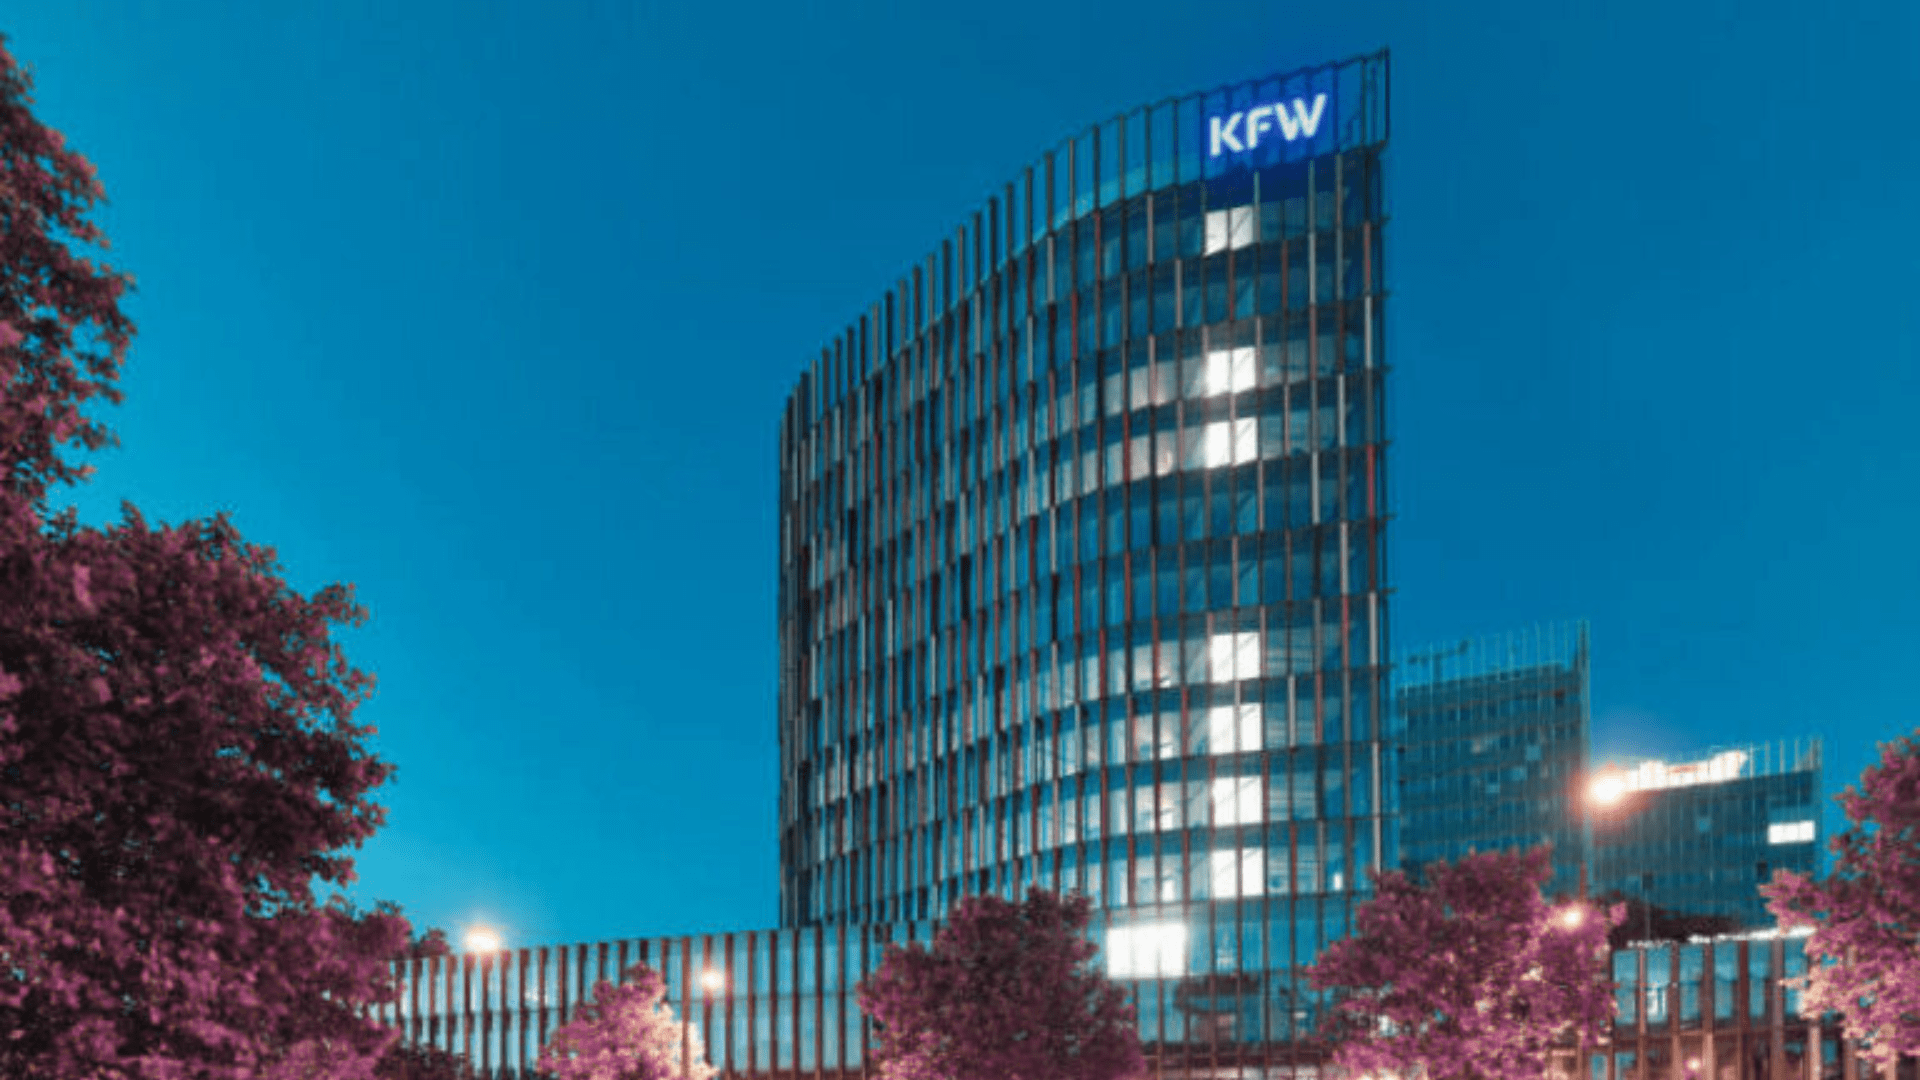 Germany’s State-Owned KfW to Issue Tokenized Bond – Will They Use Chainlink (LINK) Technology?